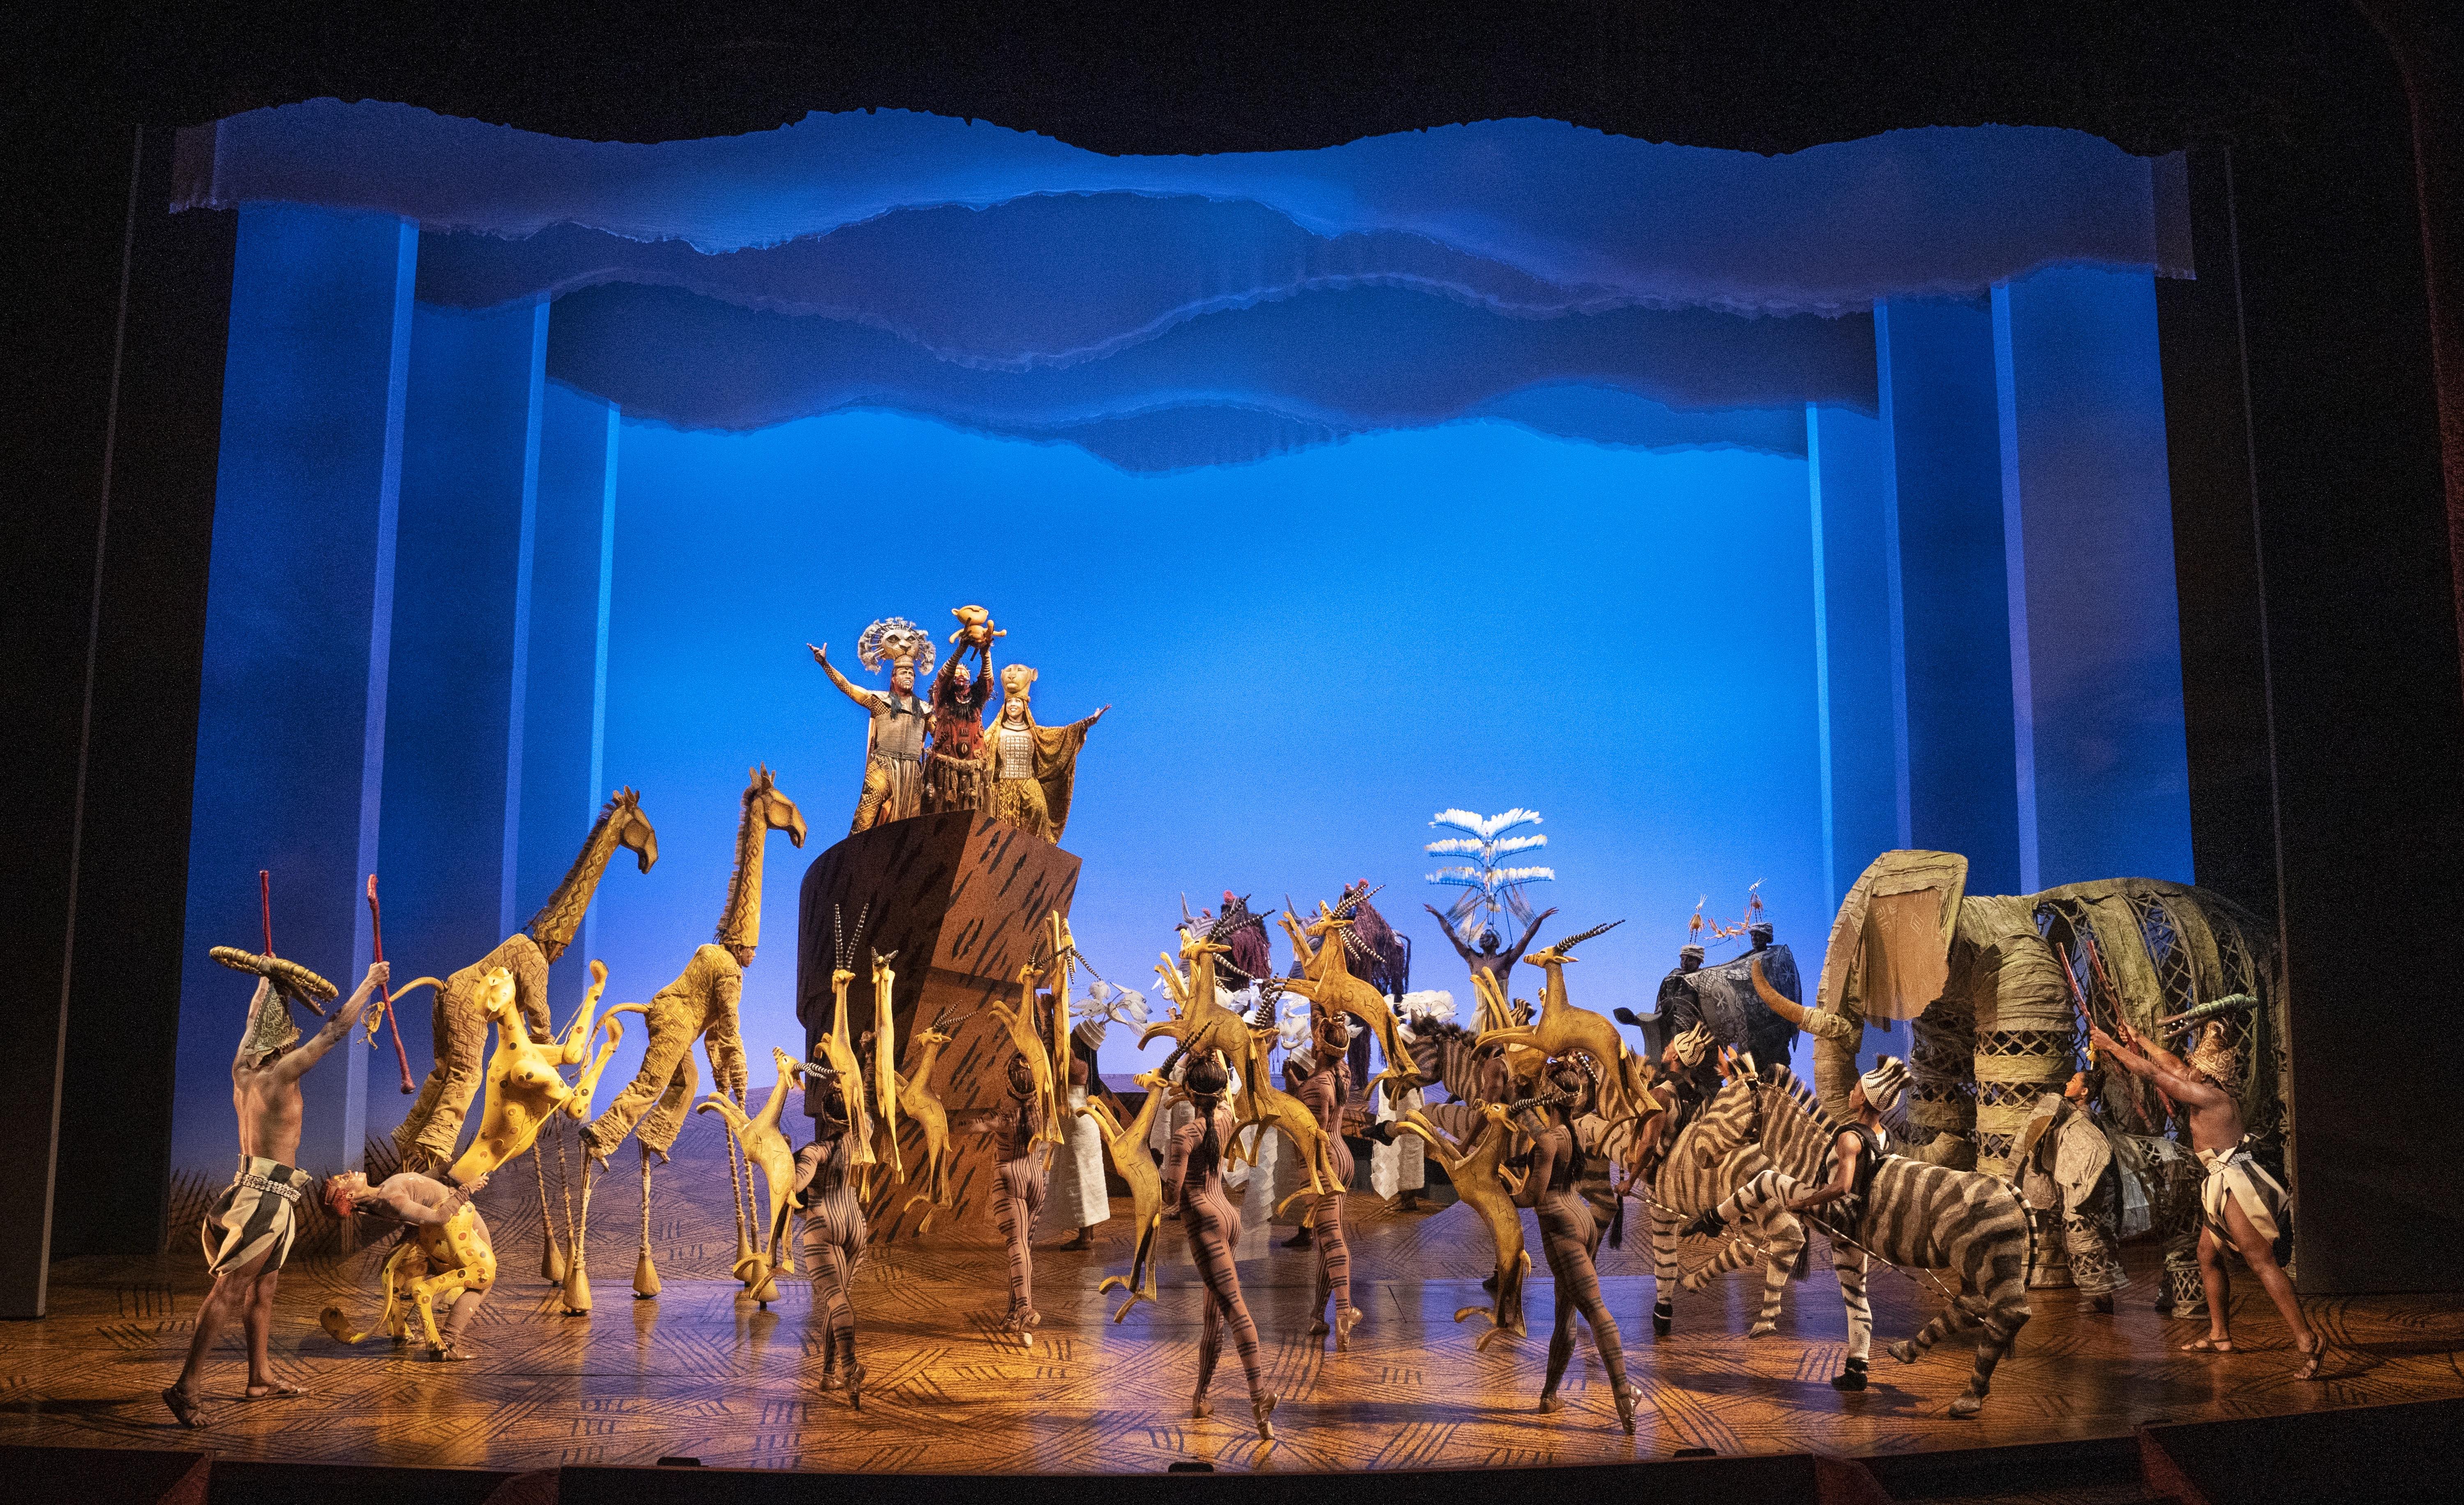 People dressed in different animal costumes on the set of The Lion King